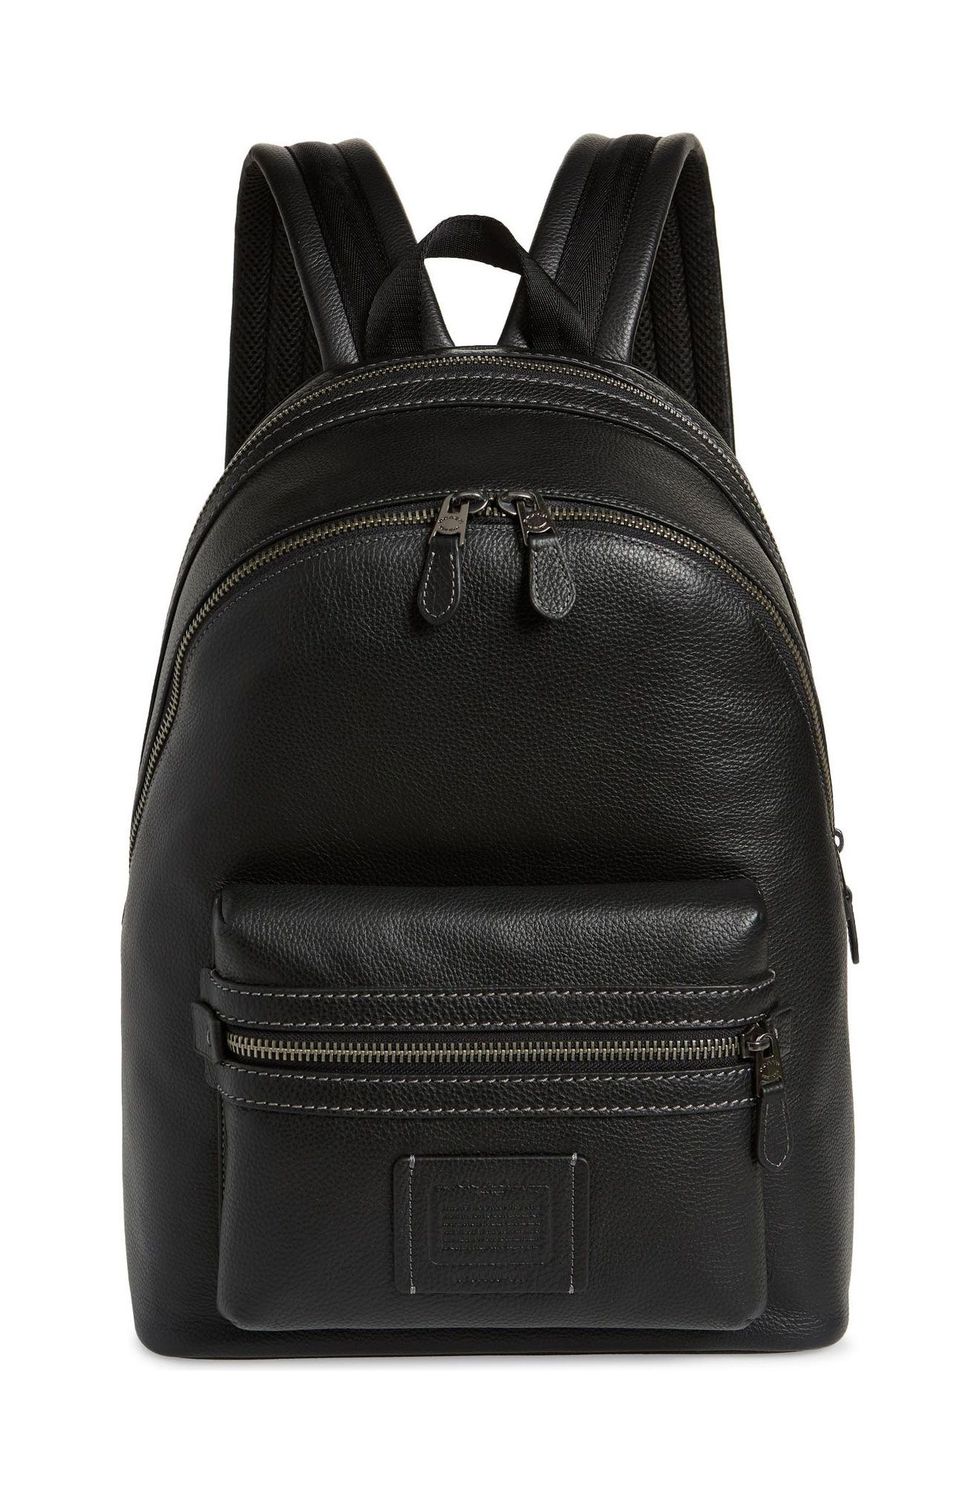 Academy Leather Backpack